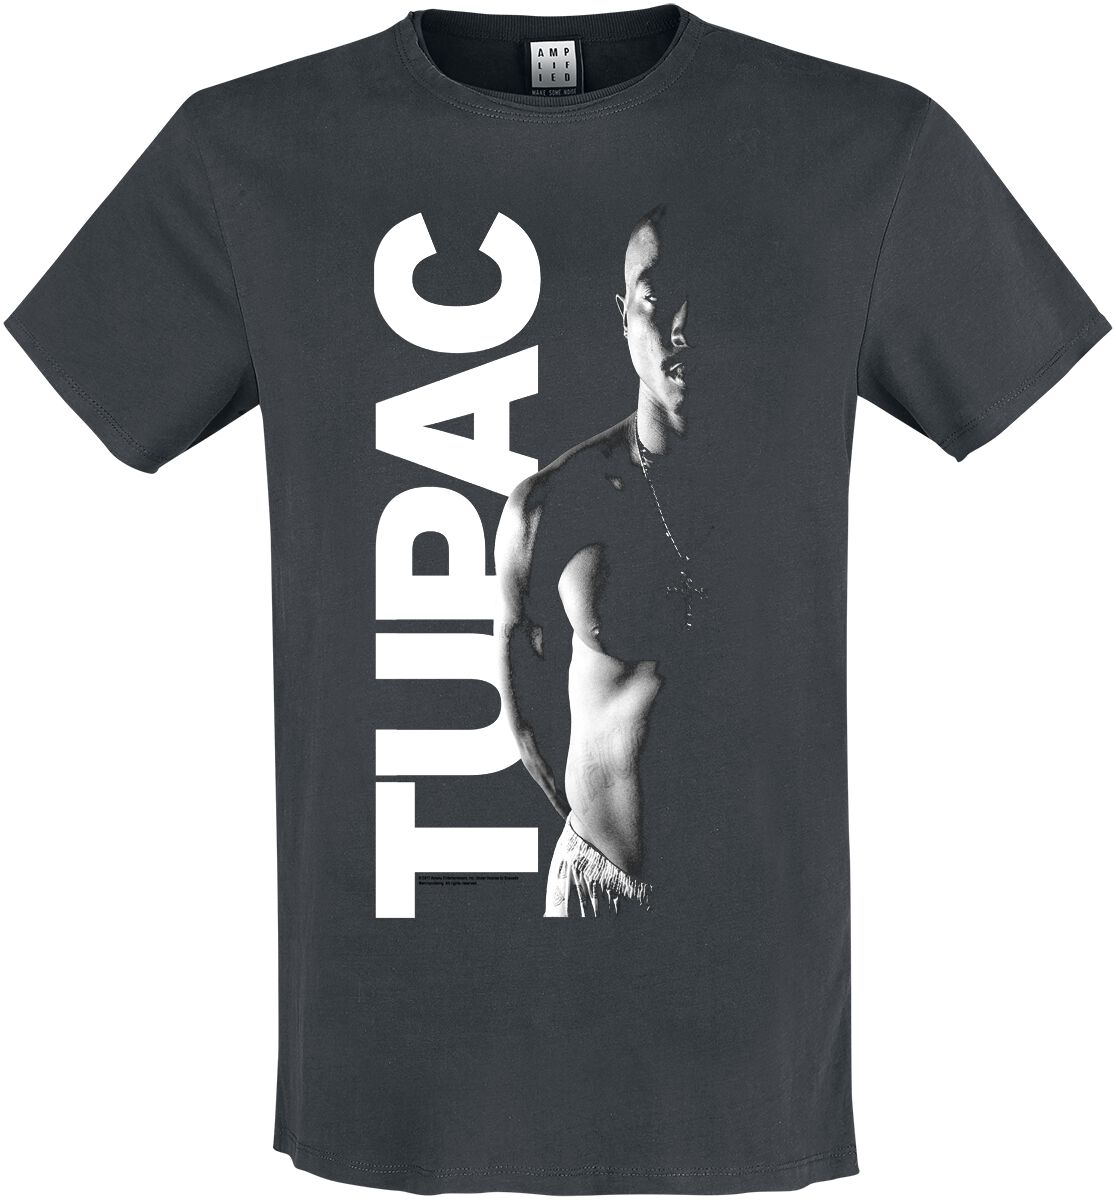 Tupac Shakur Amplified Collection - Shakur T-Shirt charcoal in M